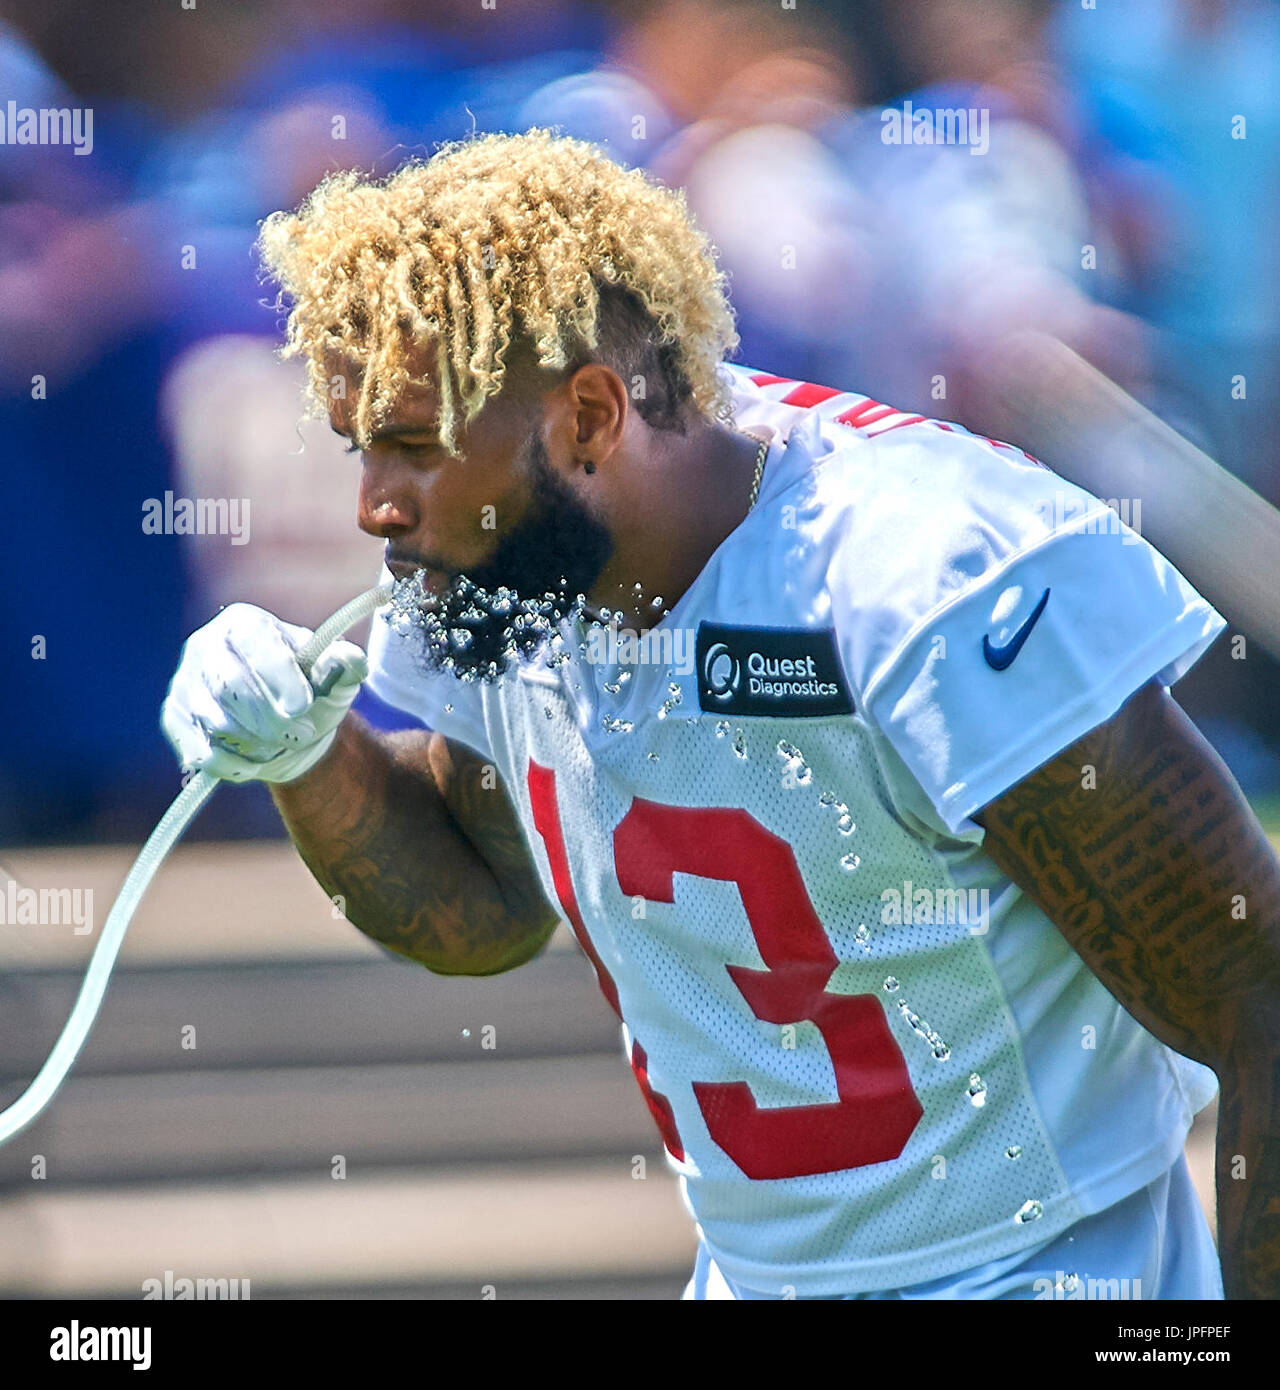 August 1, 2017 - East Rutherford, New Jersey, U.S. - New York Giants' wide  receiver Odell Beckham, Jr (13) takes a water break during practice drills  at the Quest Diagnostics Training Center